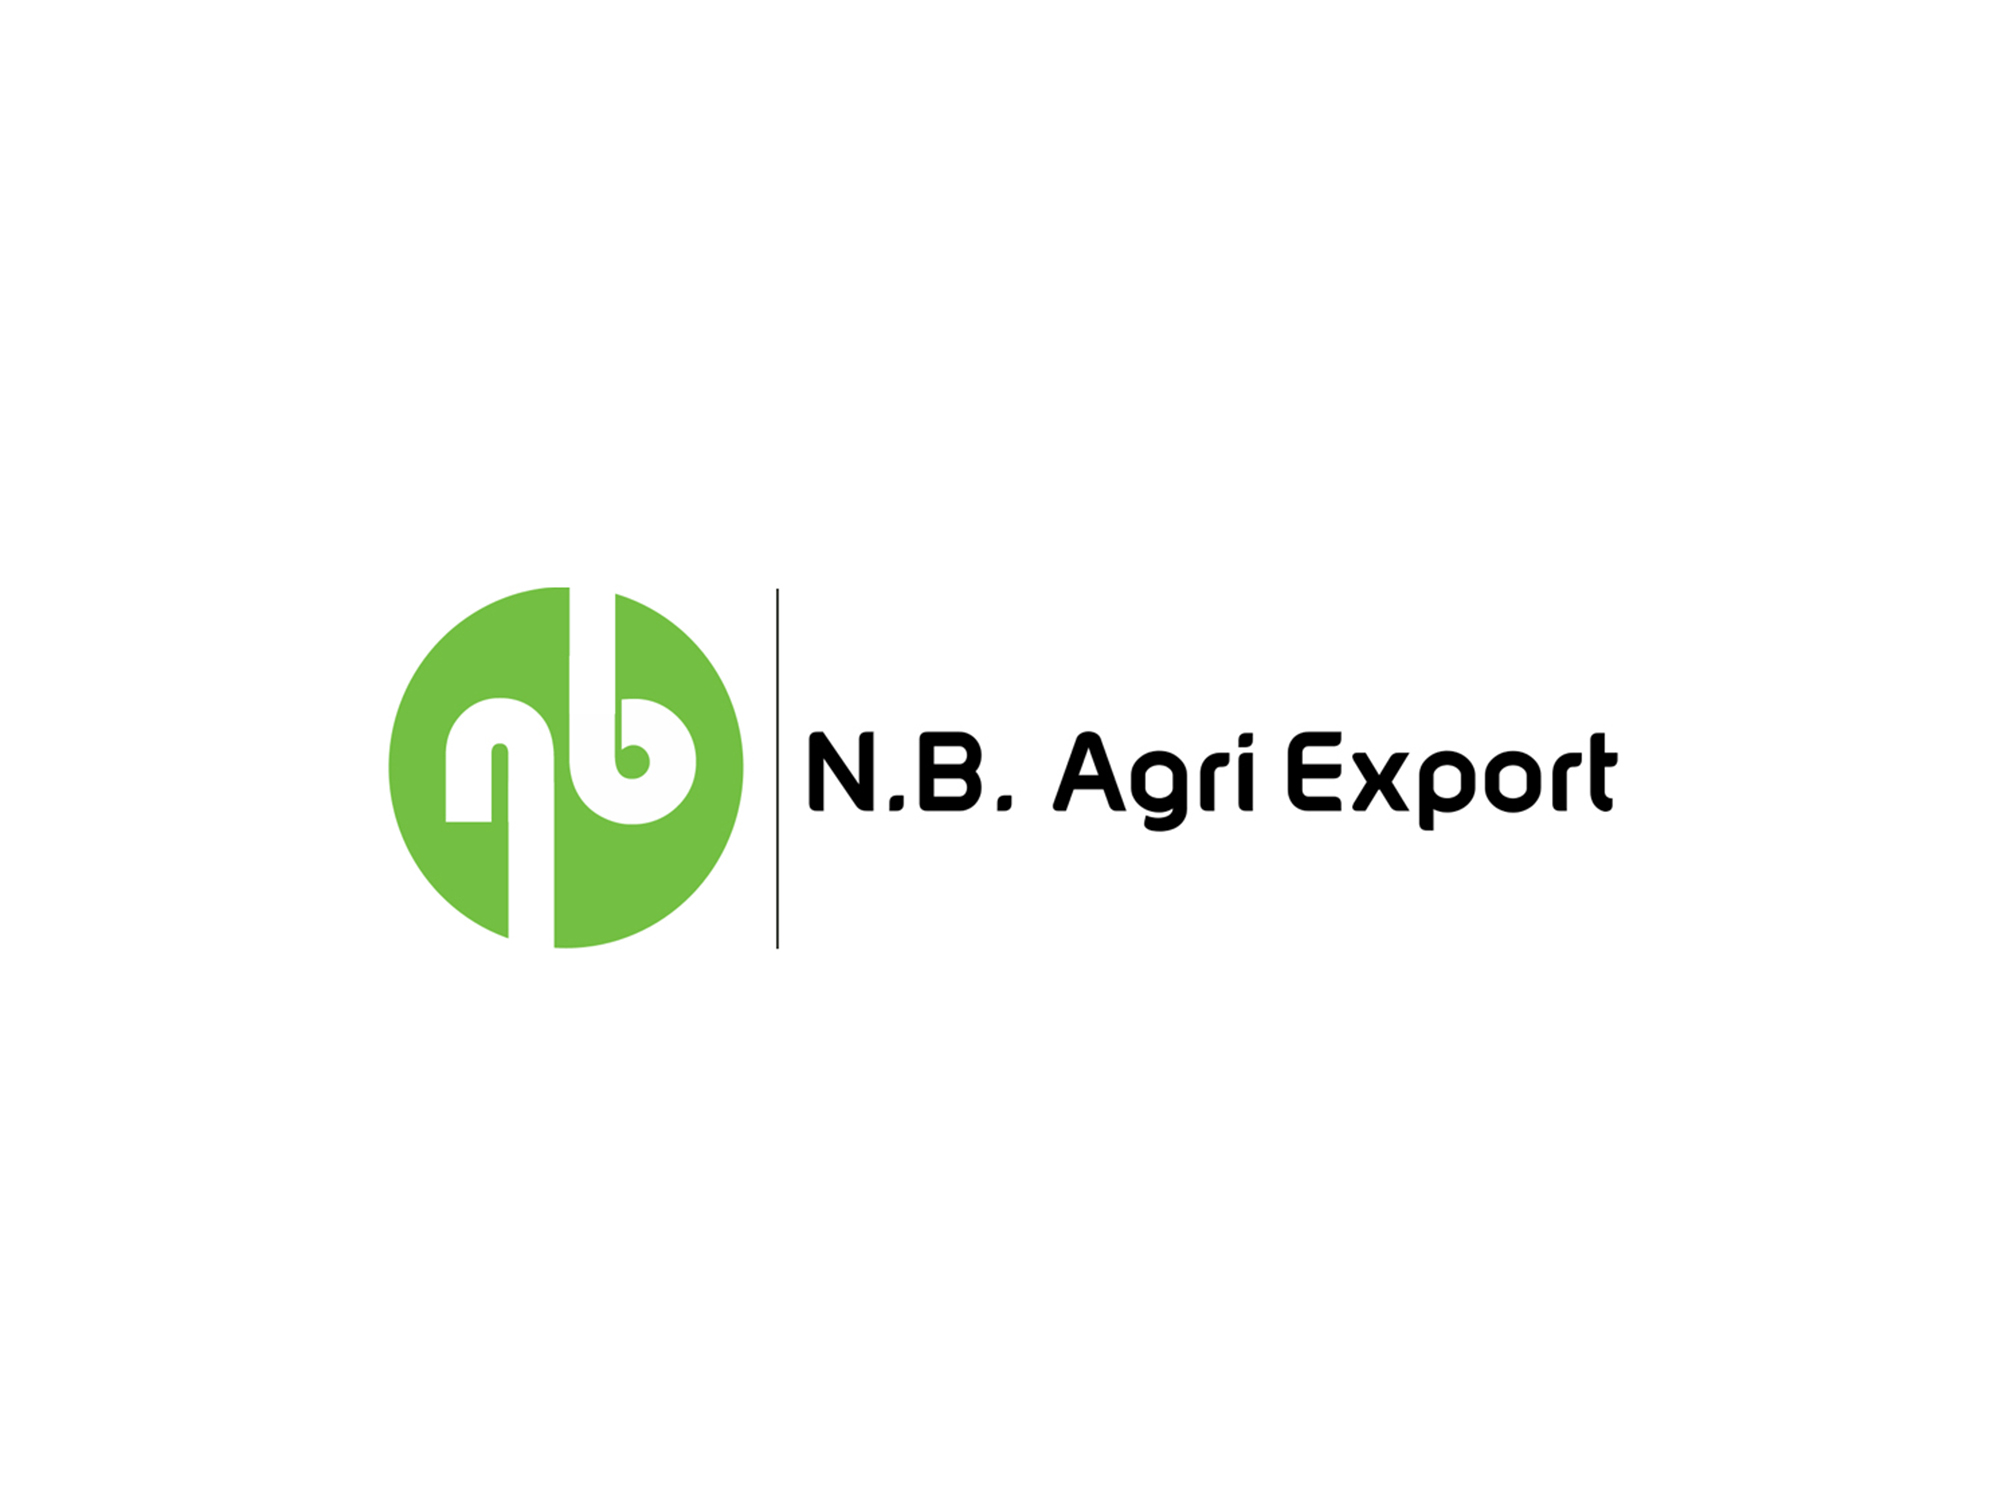 N.B.Agro - XpertLab Technologies Private Limited